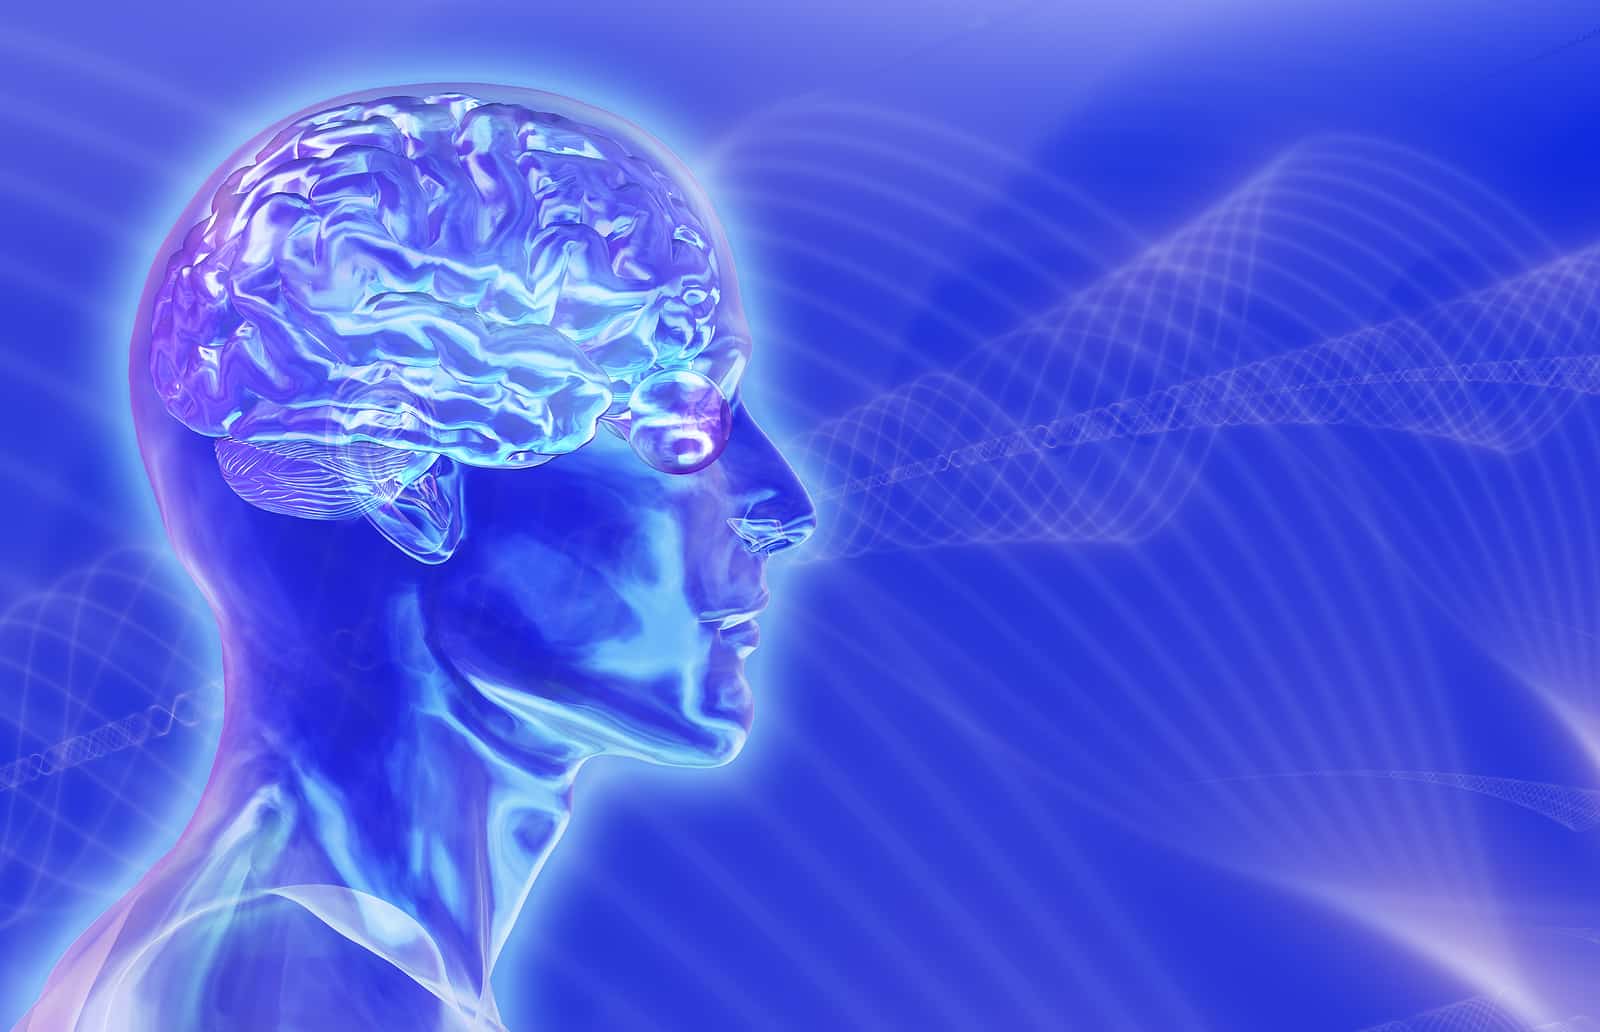 3D render of a glass head with the brain inside against a blue 'brainwaves' background.